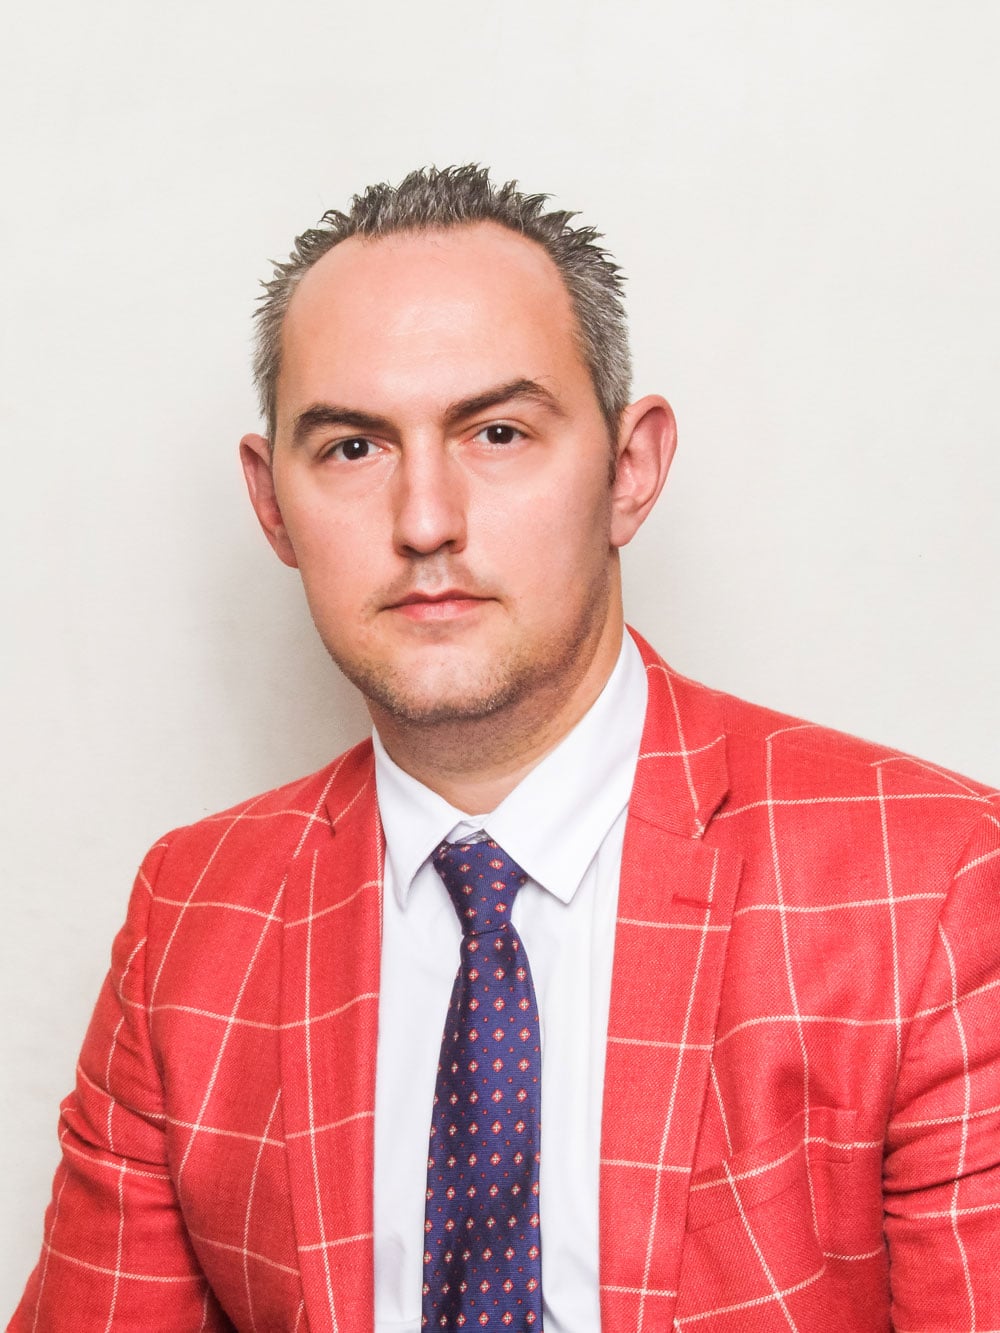 Portrait of a man Mihajlovic Uros with short hair in a red checked jacket, white shirt and patterned tie against a light background.